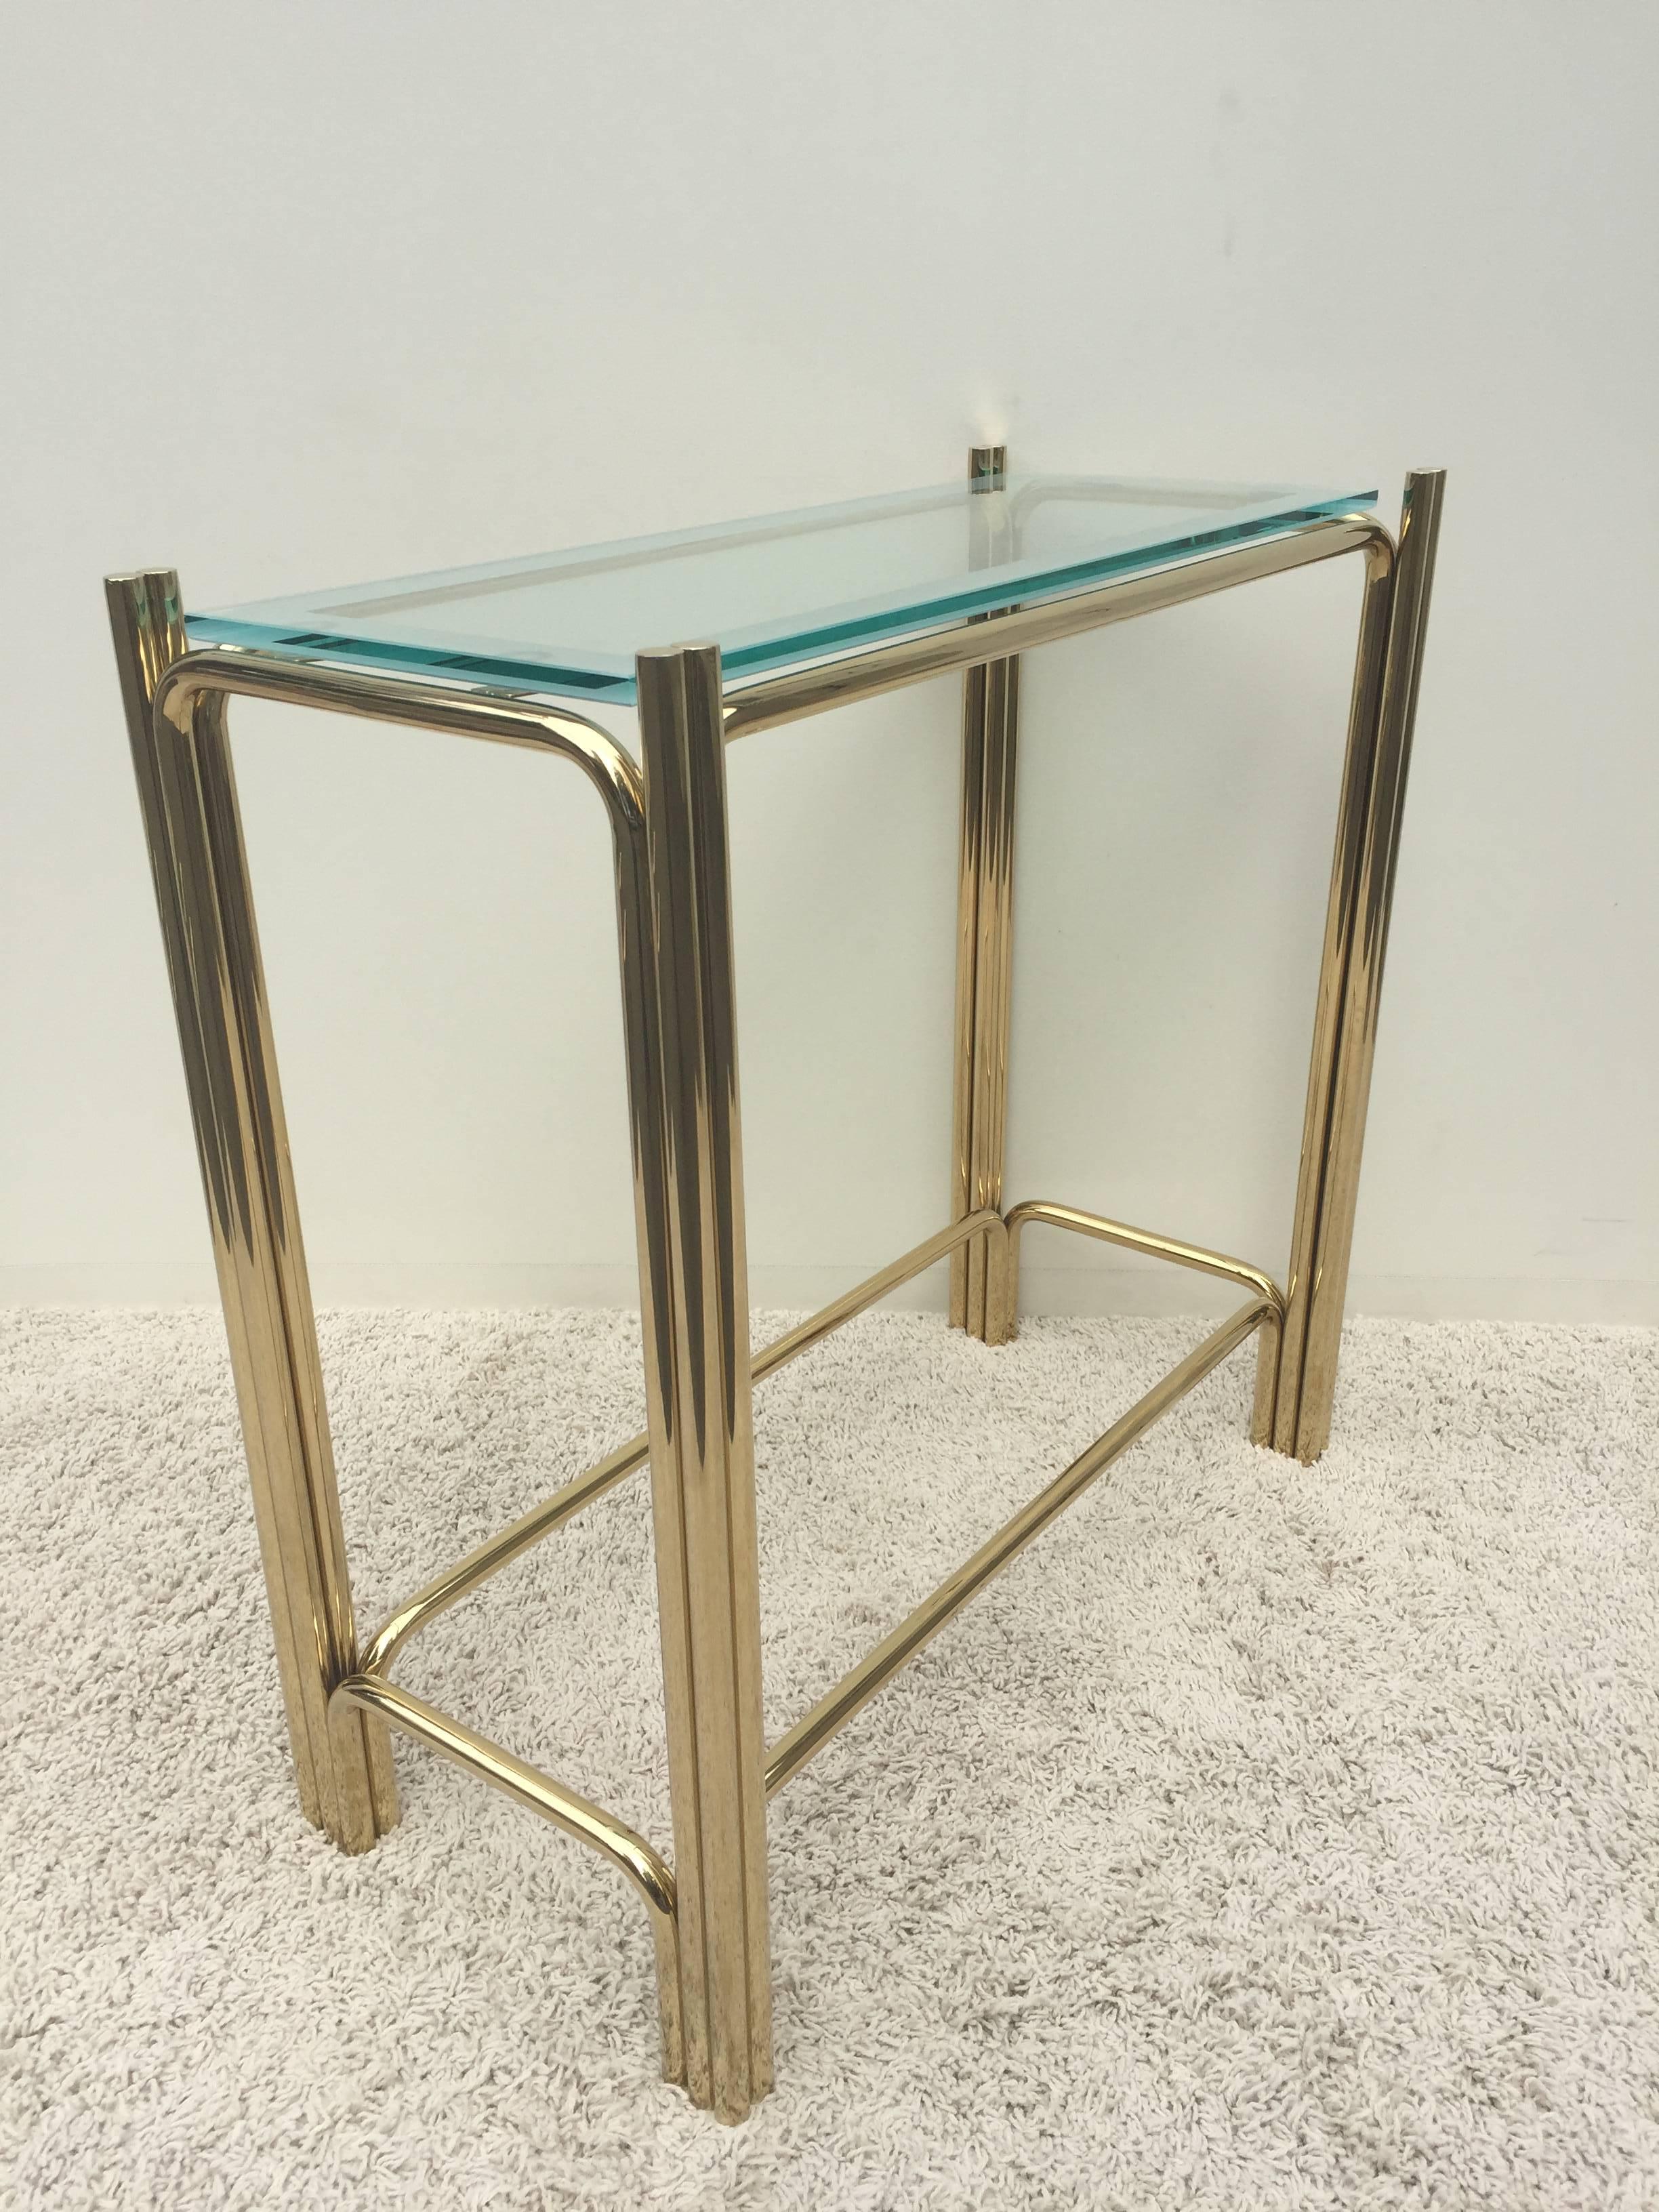 Pair of pace solid brass and plate glass frosted edge top
Consoles or sofa tables very heavy solid construction , second bottom
Tier optional for glass, originally without. High
quality.